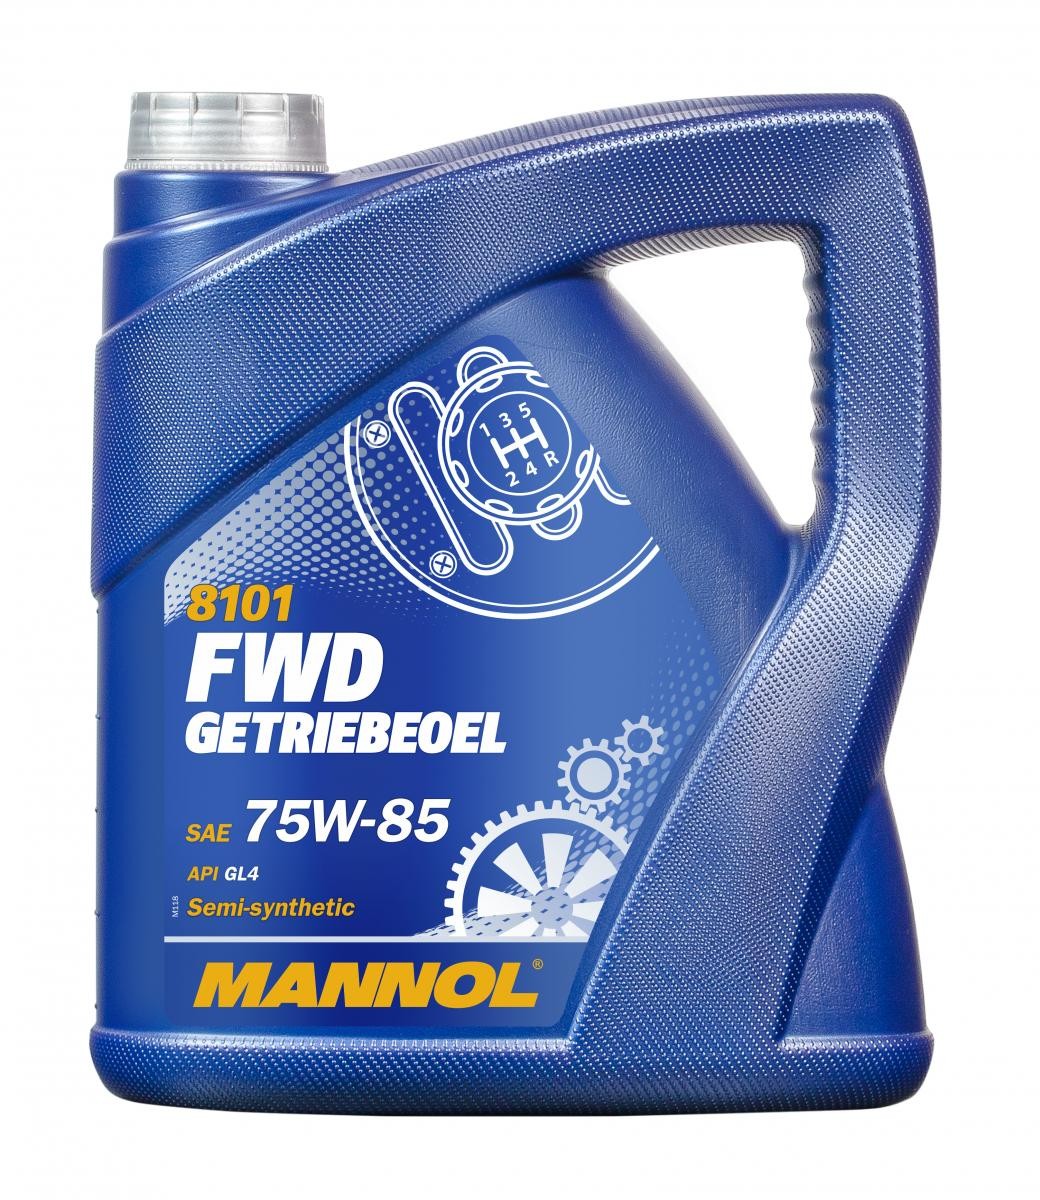 MANNOL MN8101-4 Transmission fluid JEEP experience and price